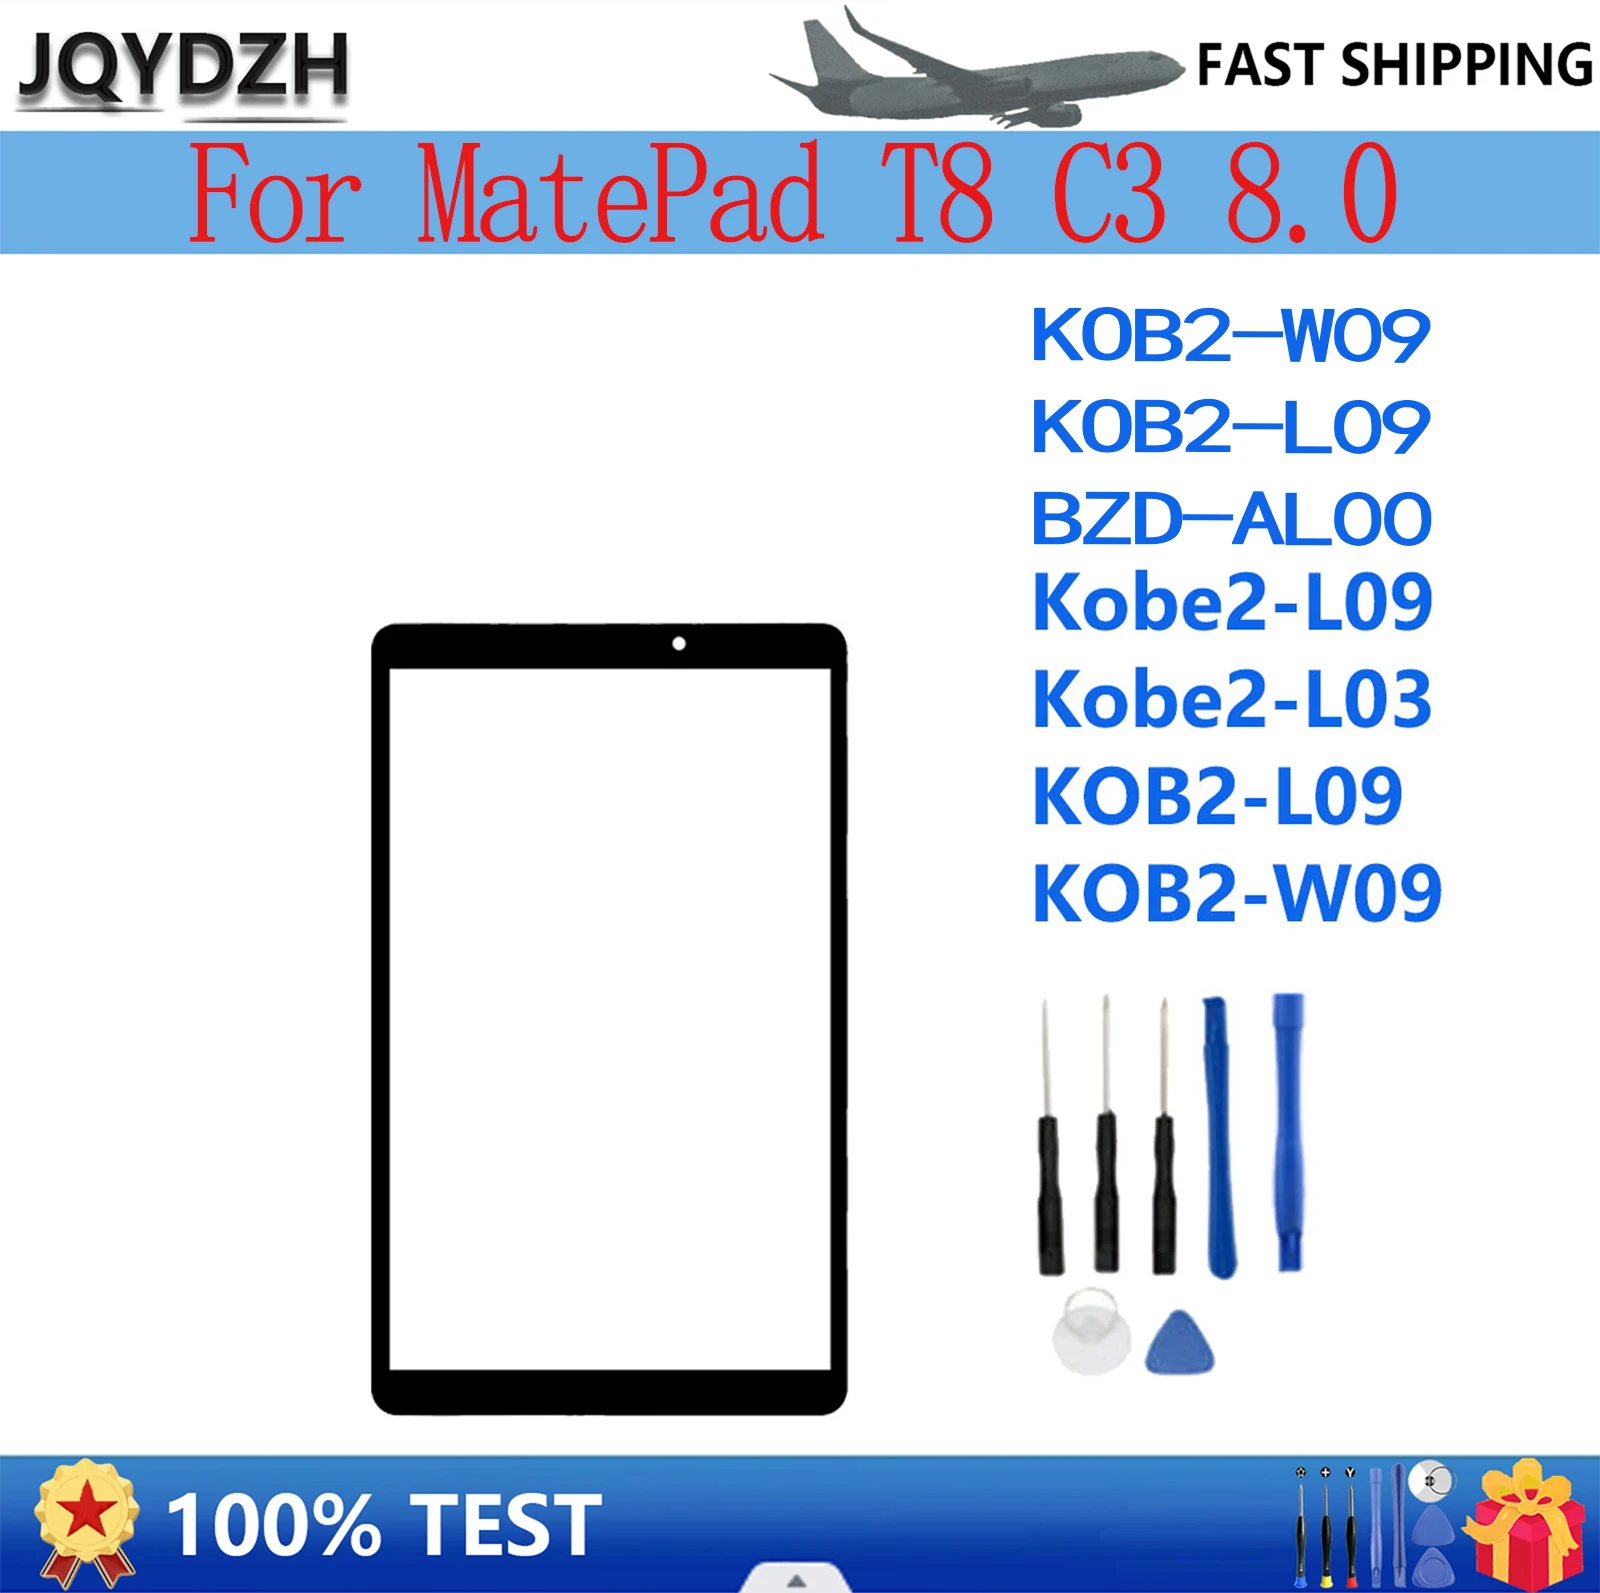 

JQYDZH For MatePad T8 C3 8.0 KOB2-W09 KOB2-L09 BZD-AL00 Only the cover outer screen The front glass New front glass cover